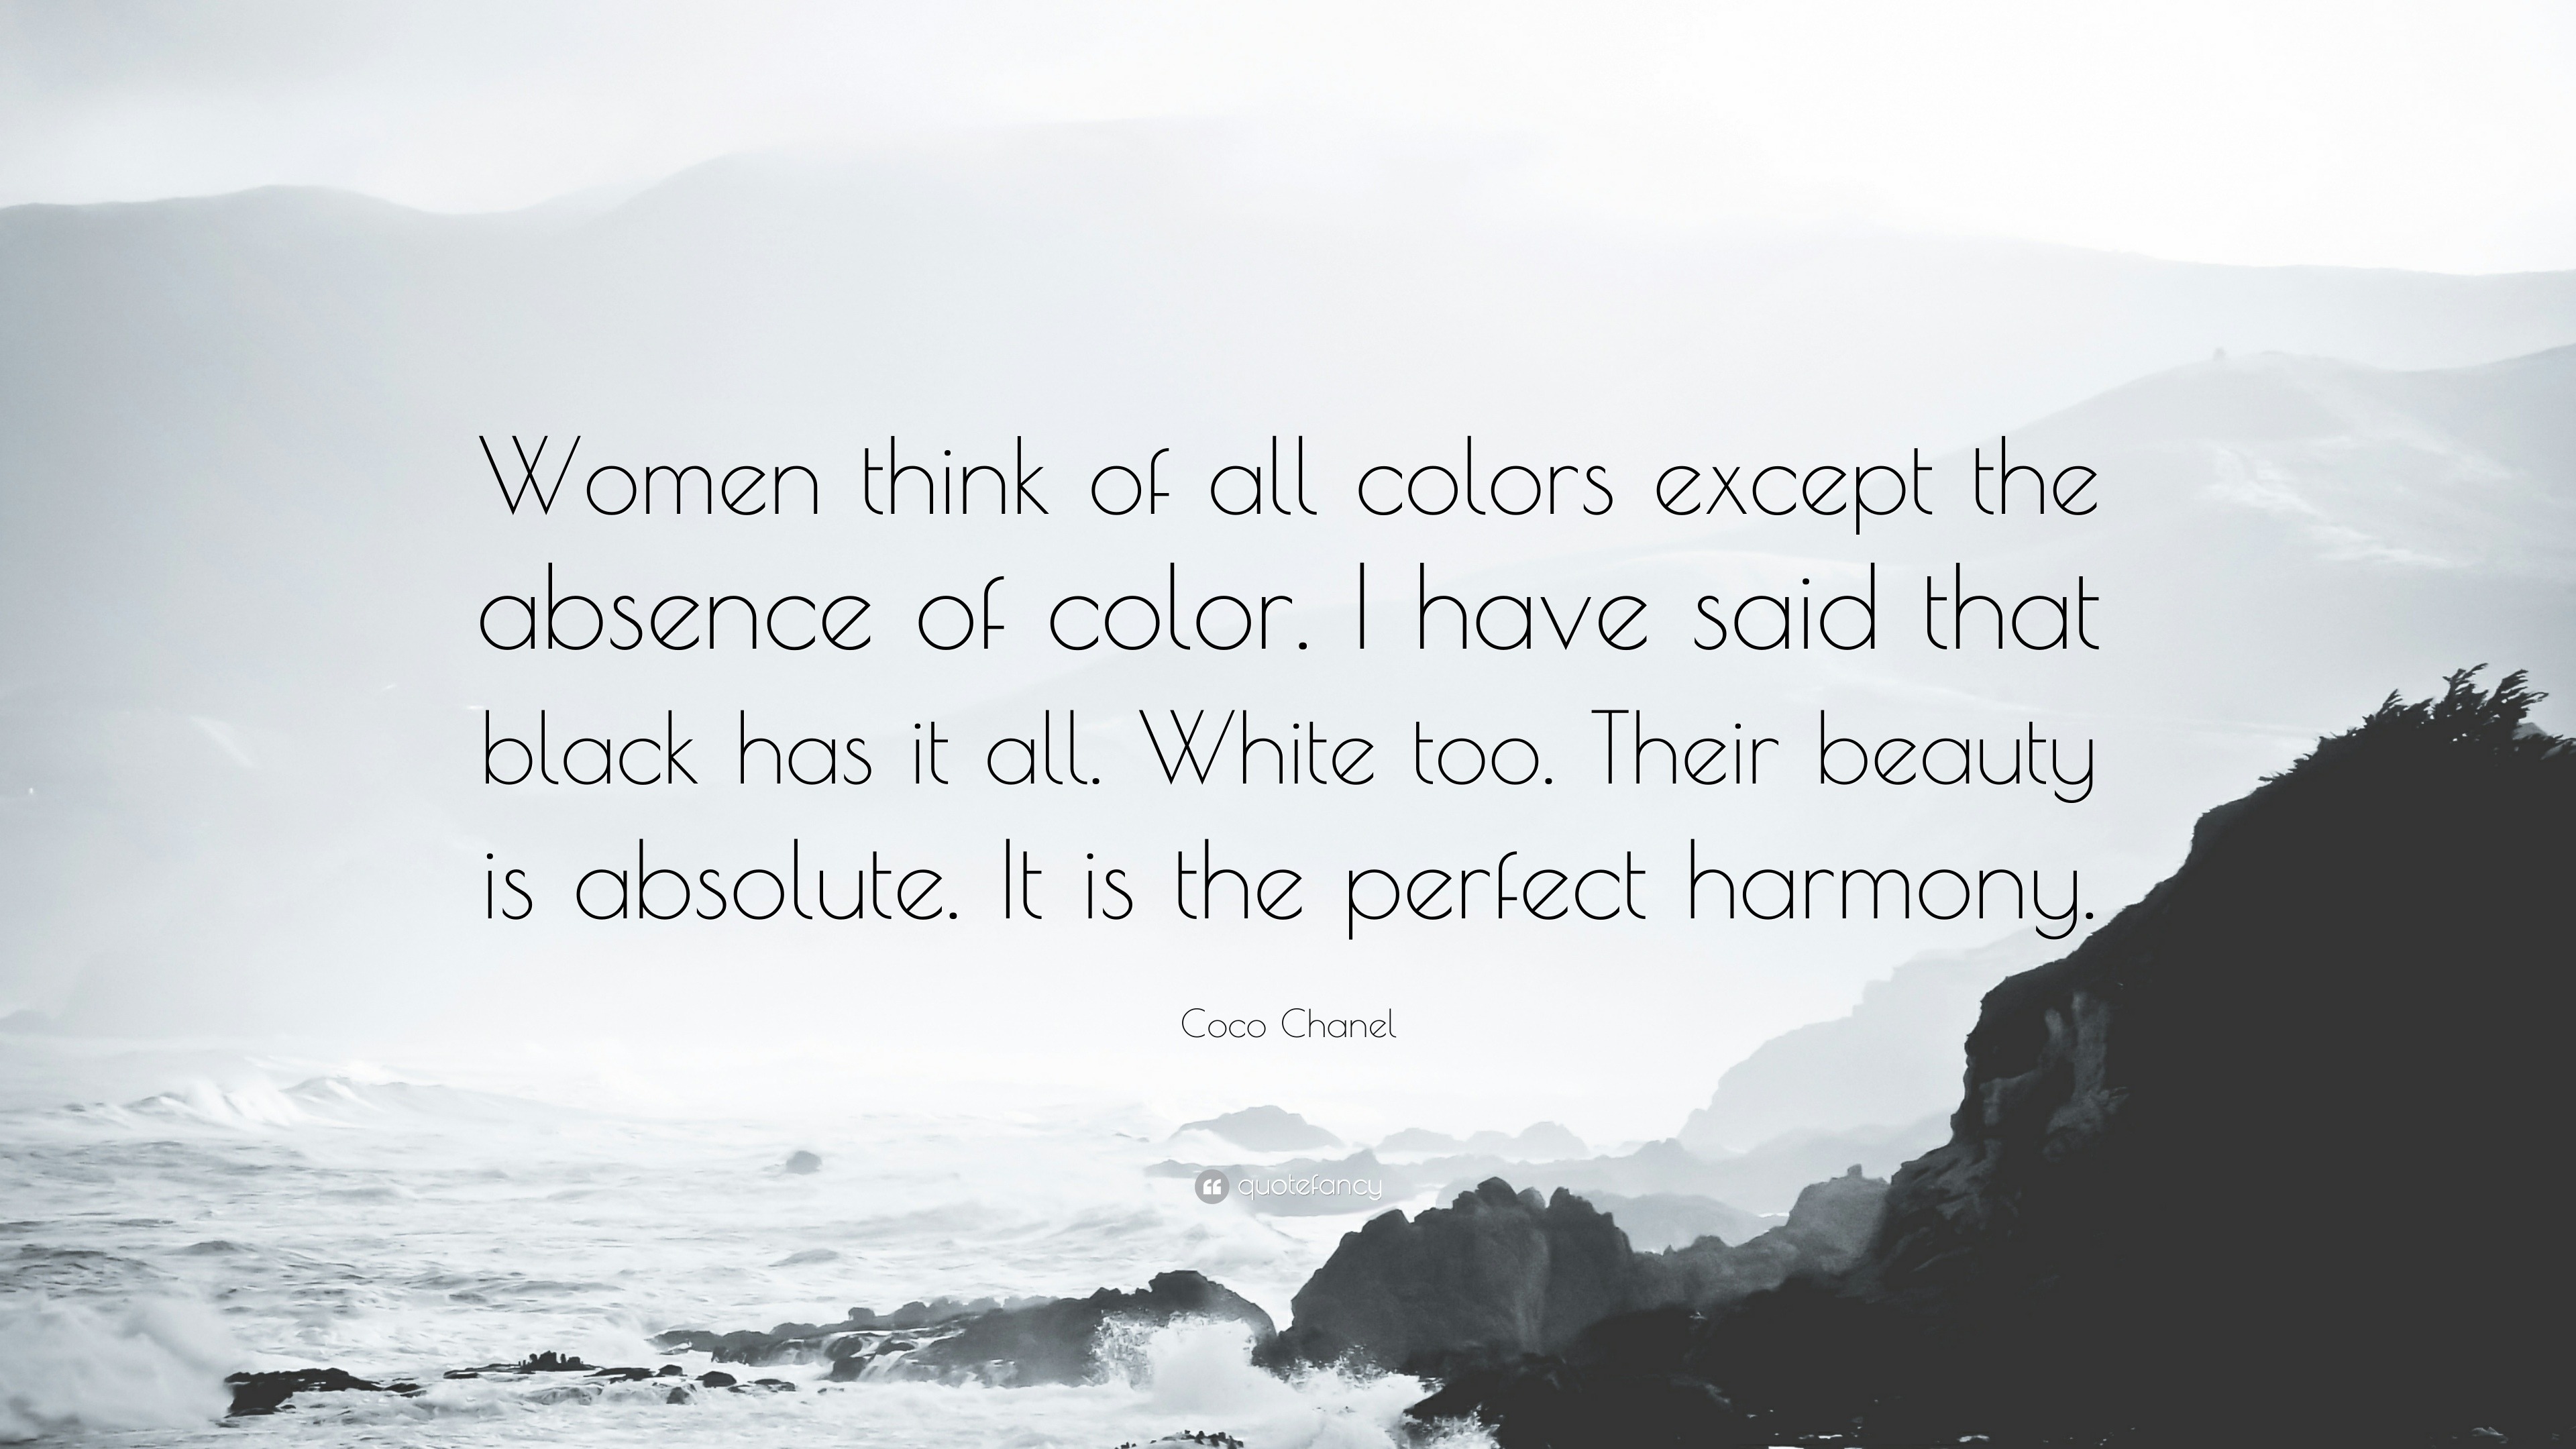 Coco Chanel Quote: “Women think of all colors except the absence of color.  I have said that black has it all. White too. Their beauty is abs”